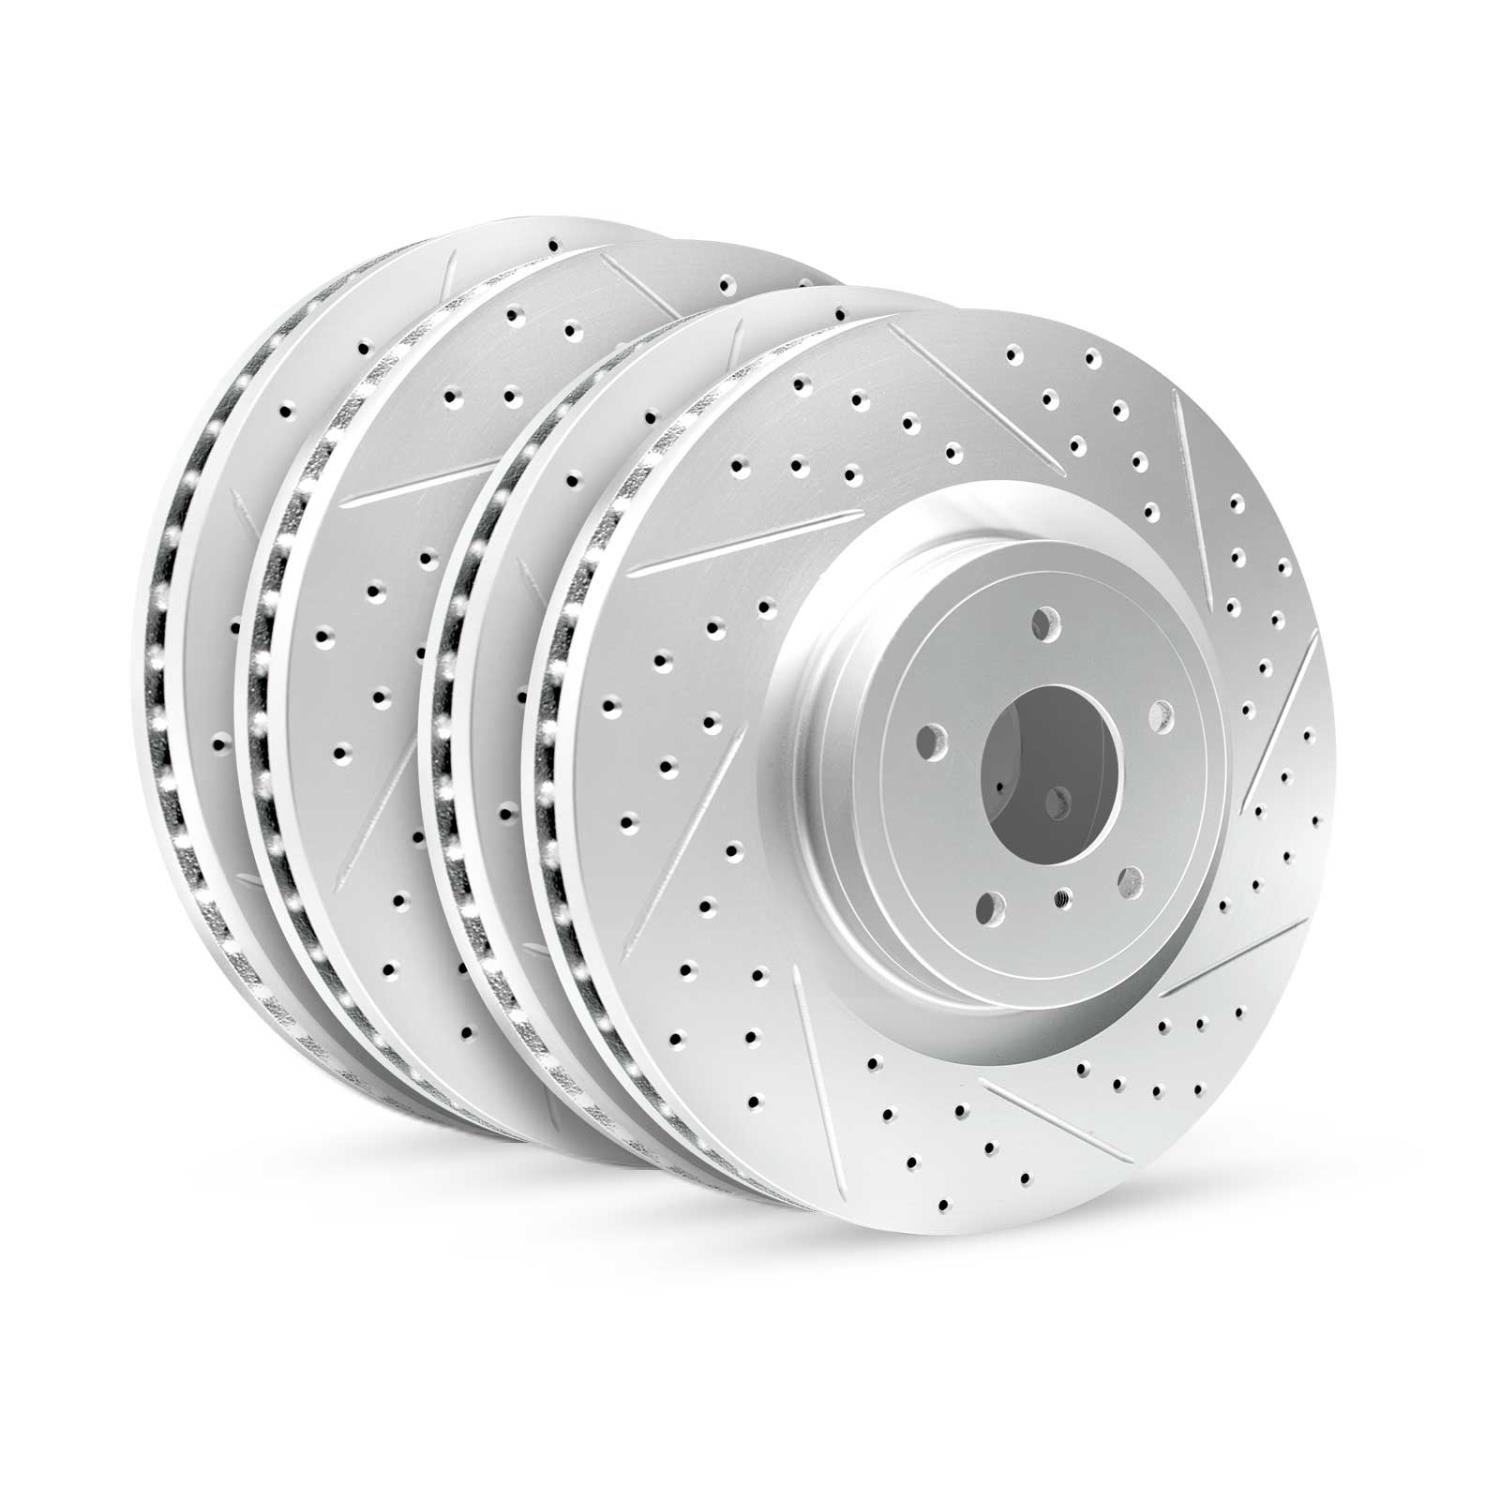 GEO-Carbon Drilled/Slotted Rotors, 1995-2000 Lexus/Toyota/Scion,